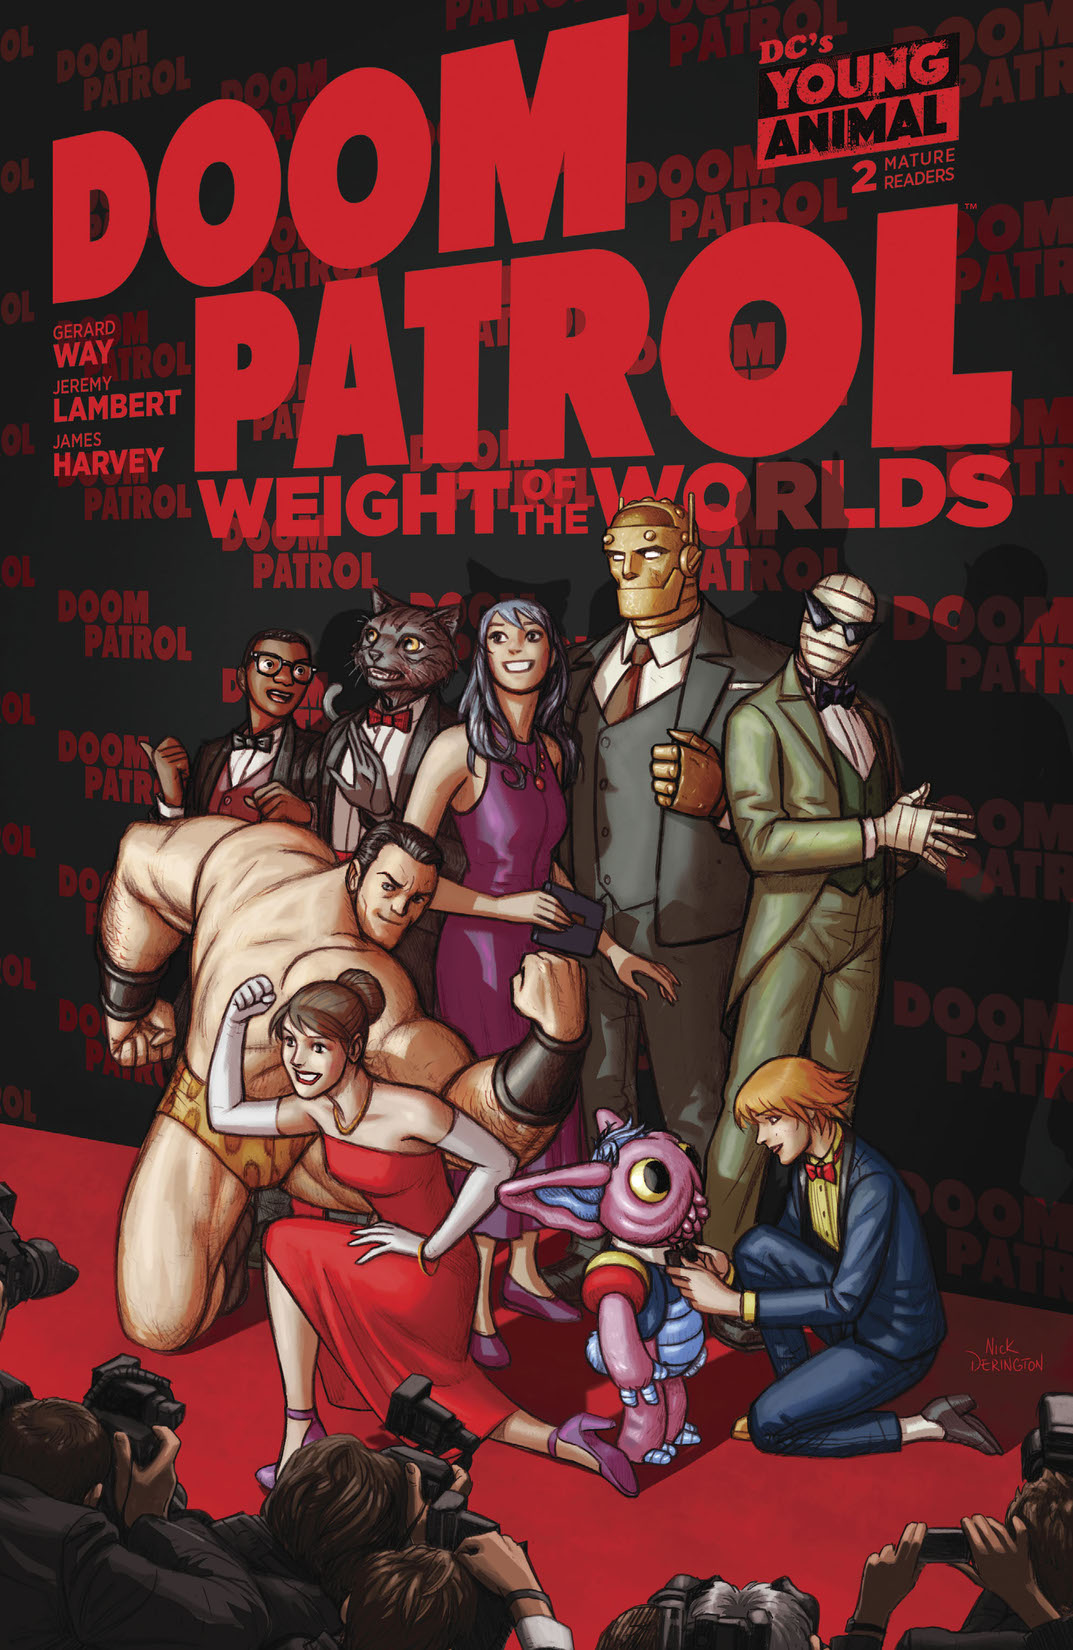 Doom Patrol: Weight of the Worlds #2 preview images